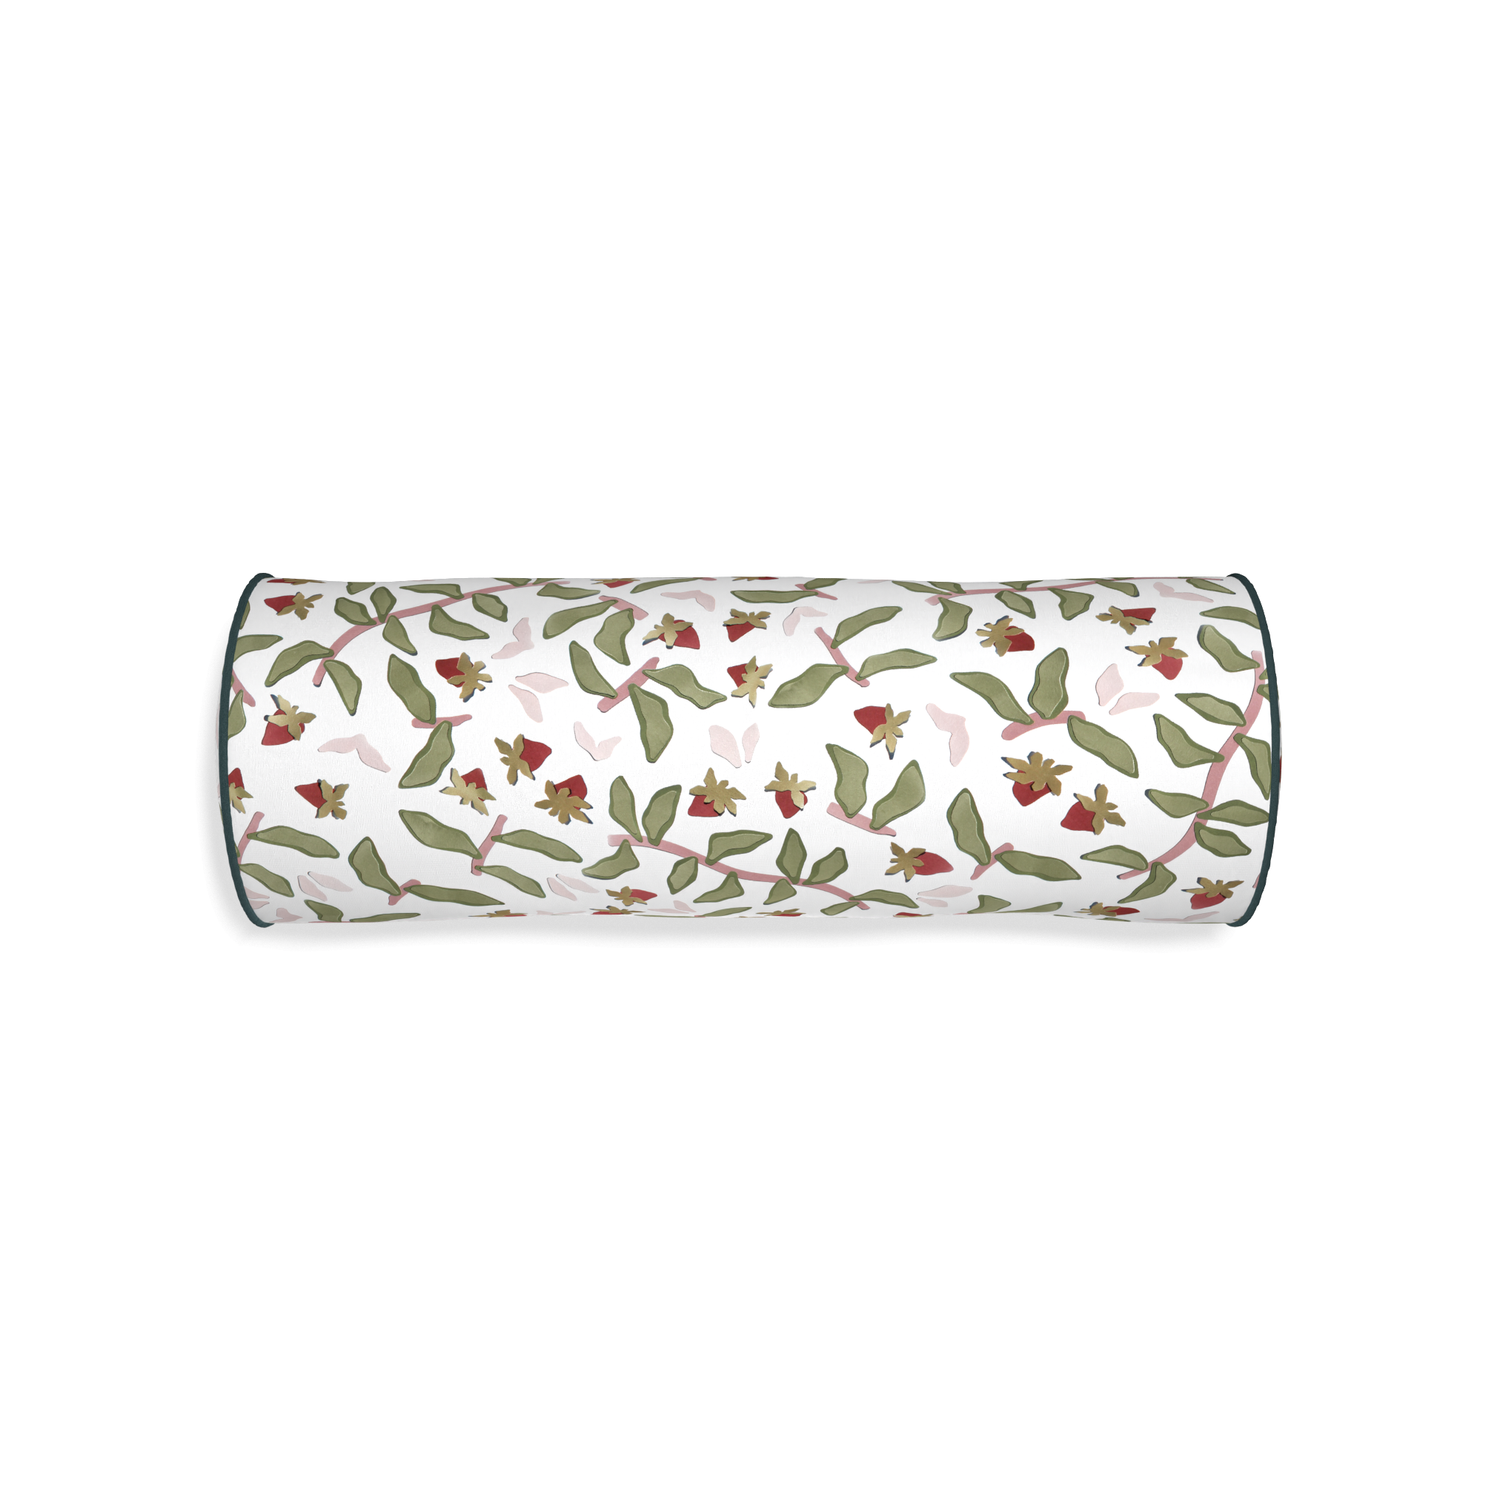 Bolster nellie custom strawberry & botanicalpillow with p piping on white background